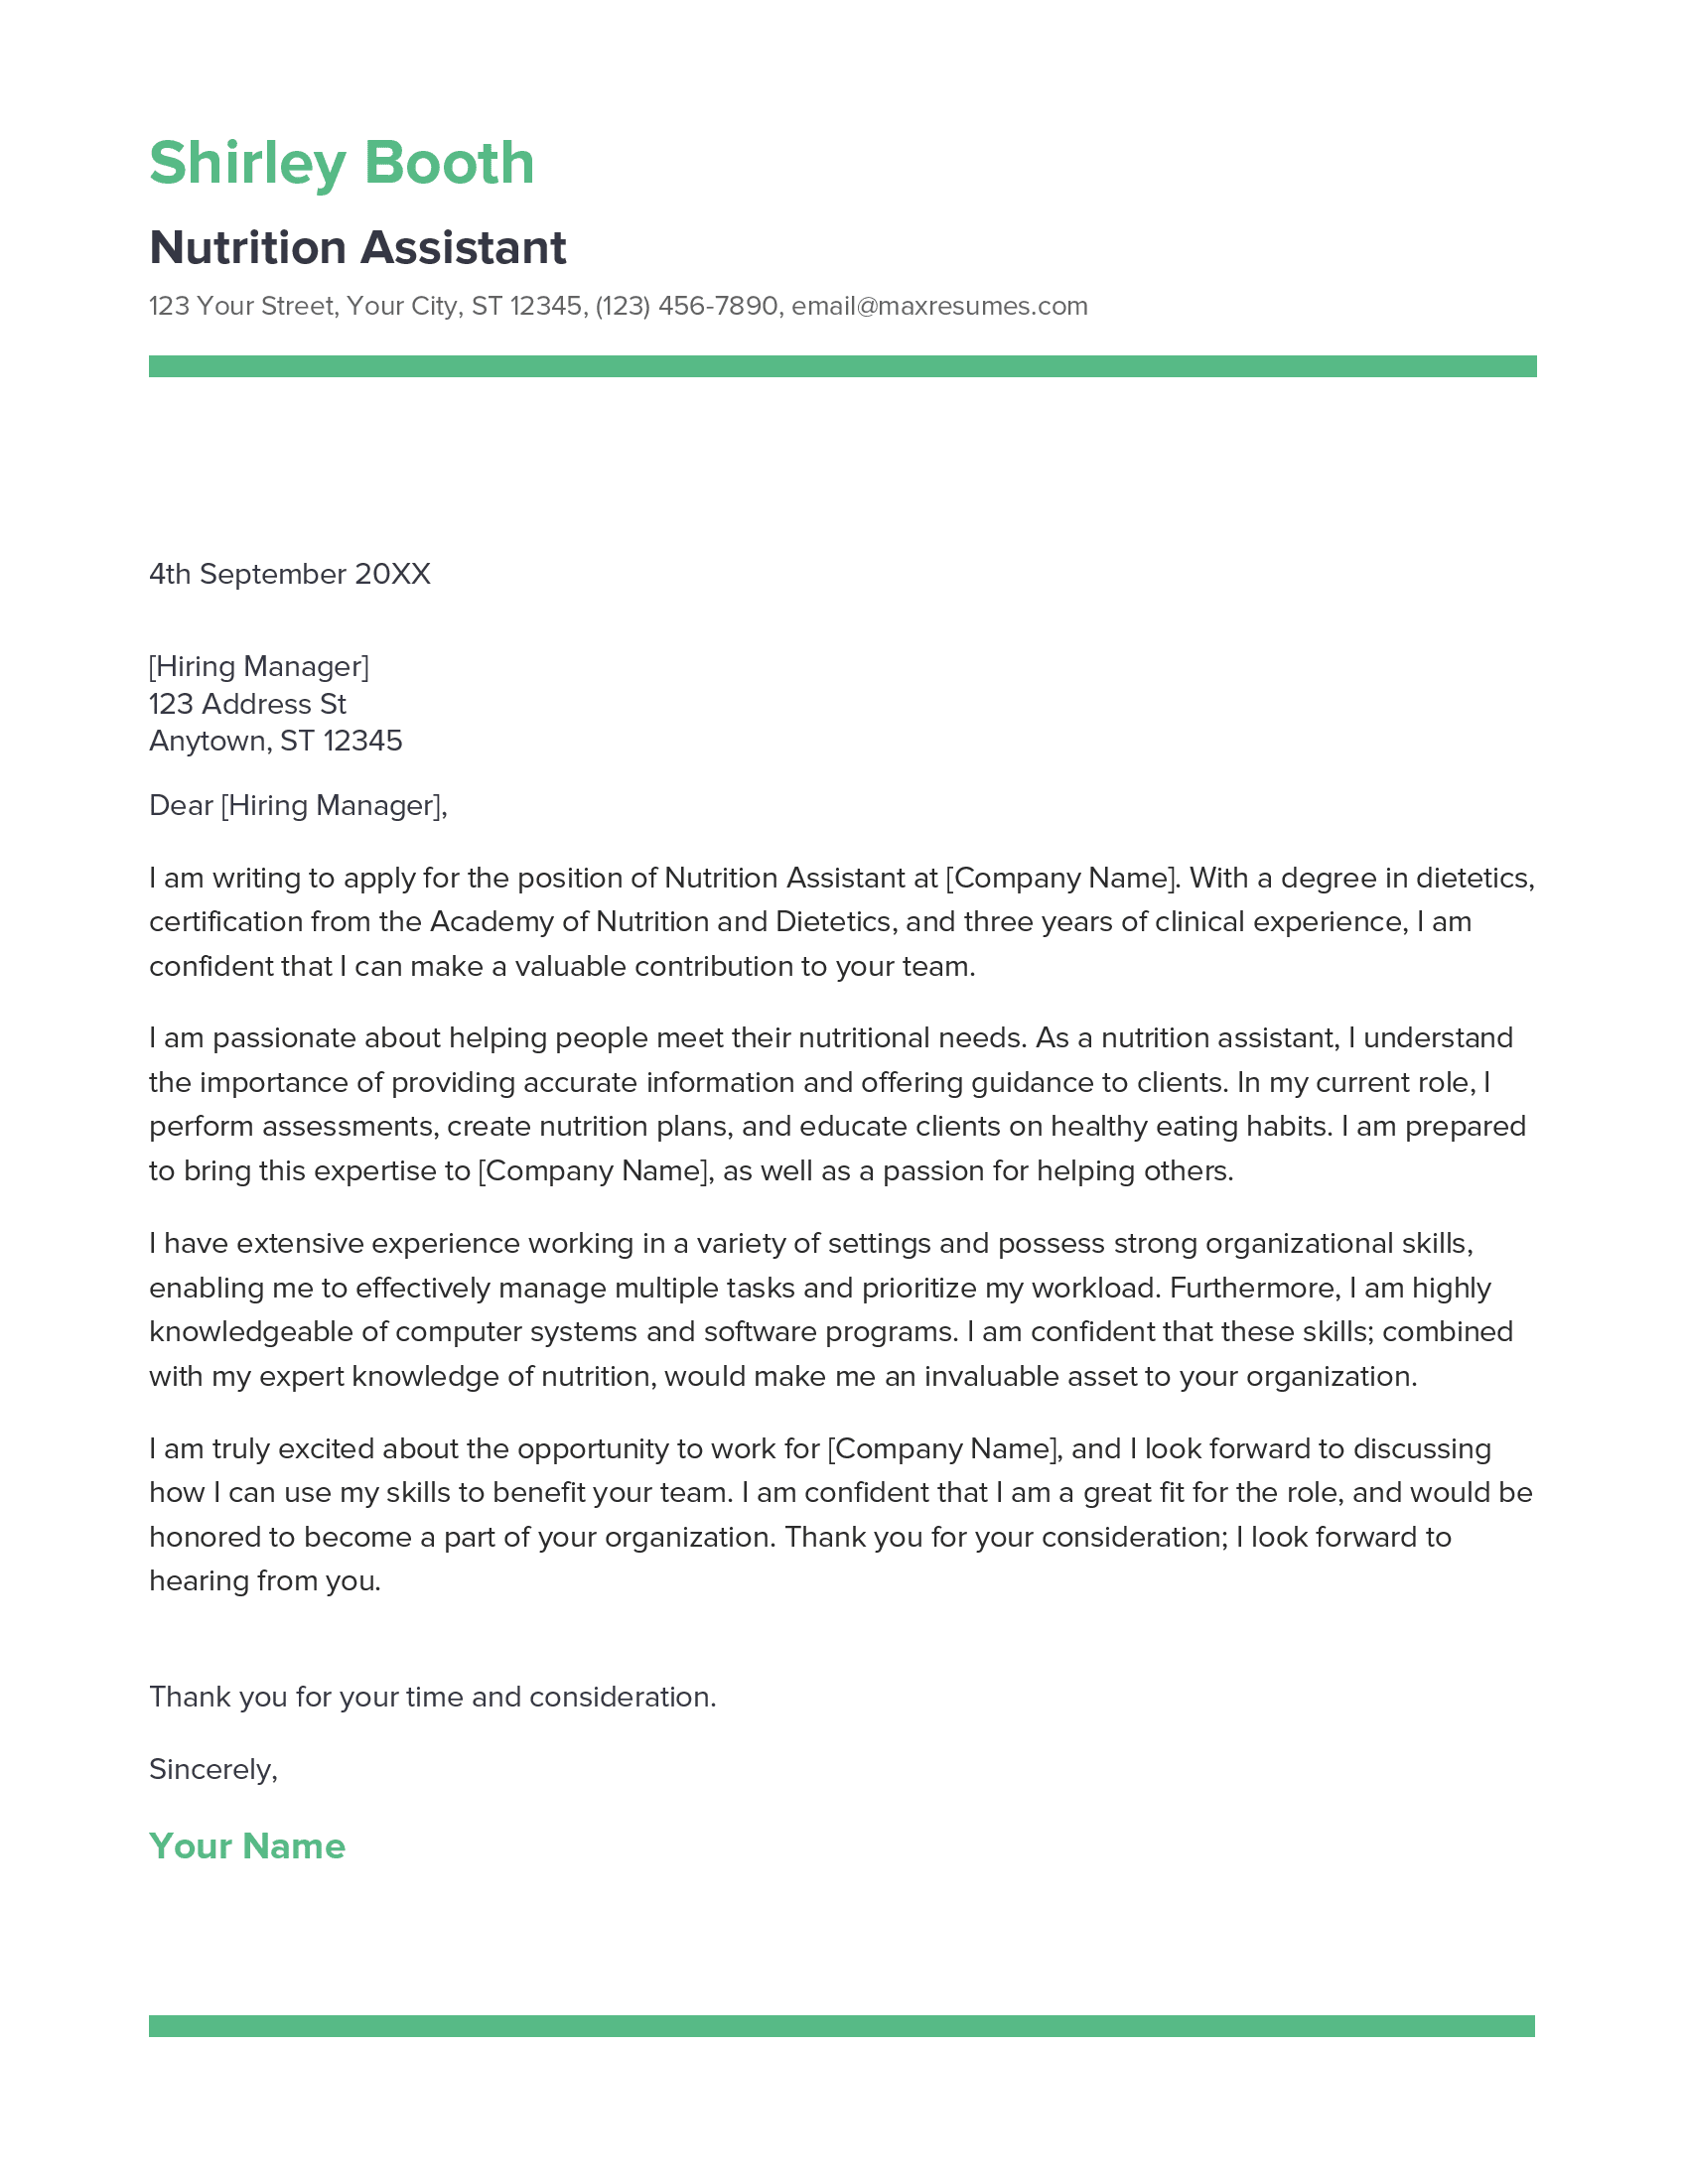 Nutrition Assistant Cover Letter Example